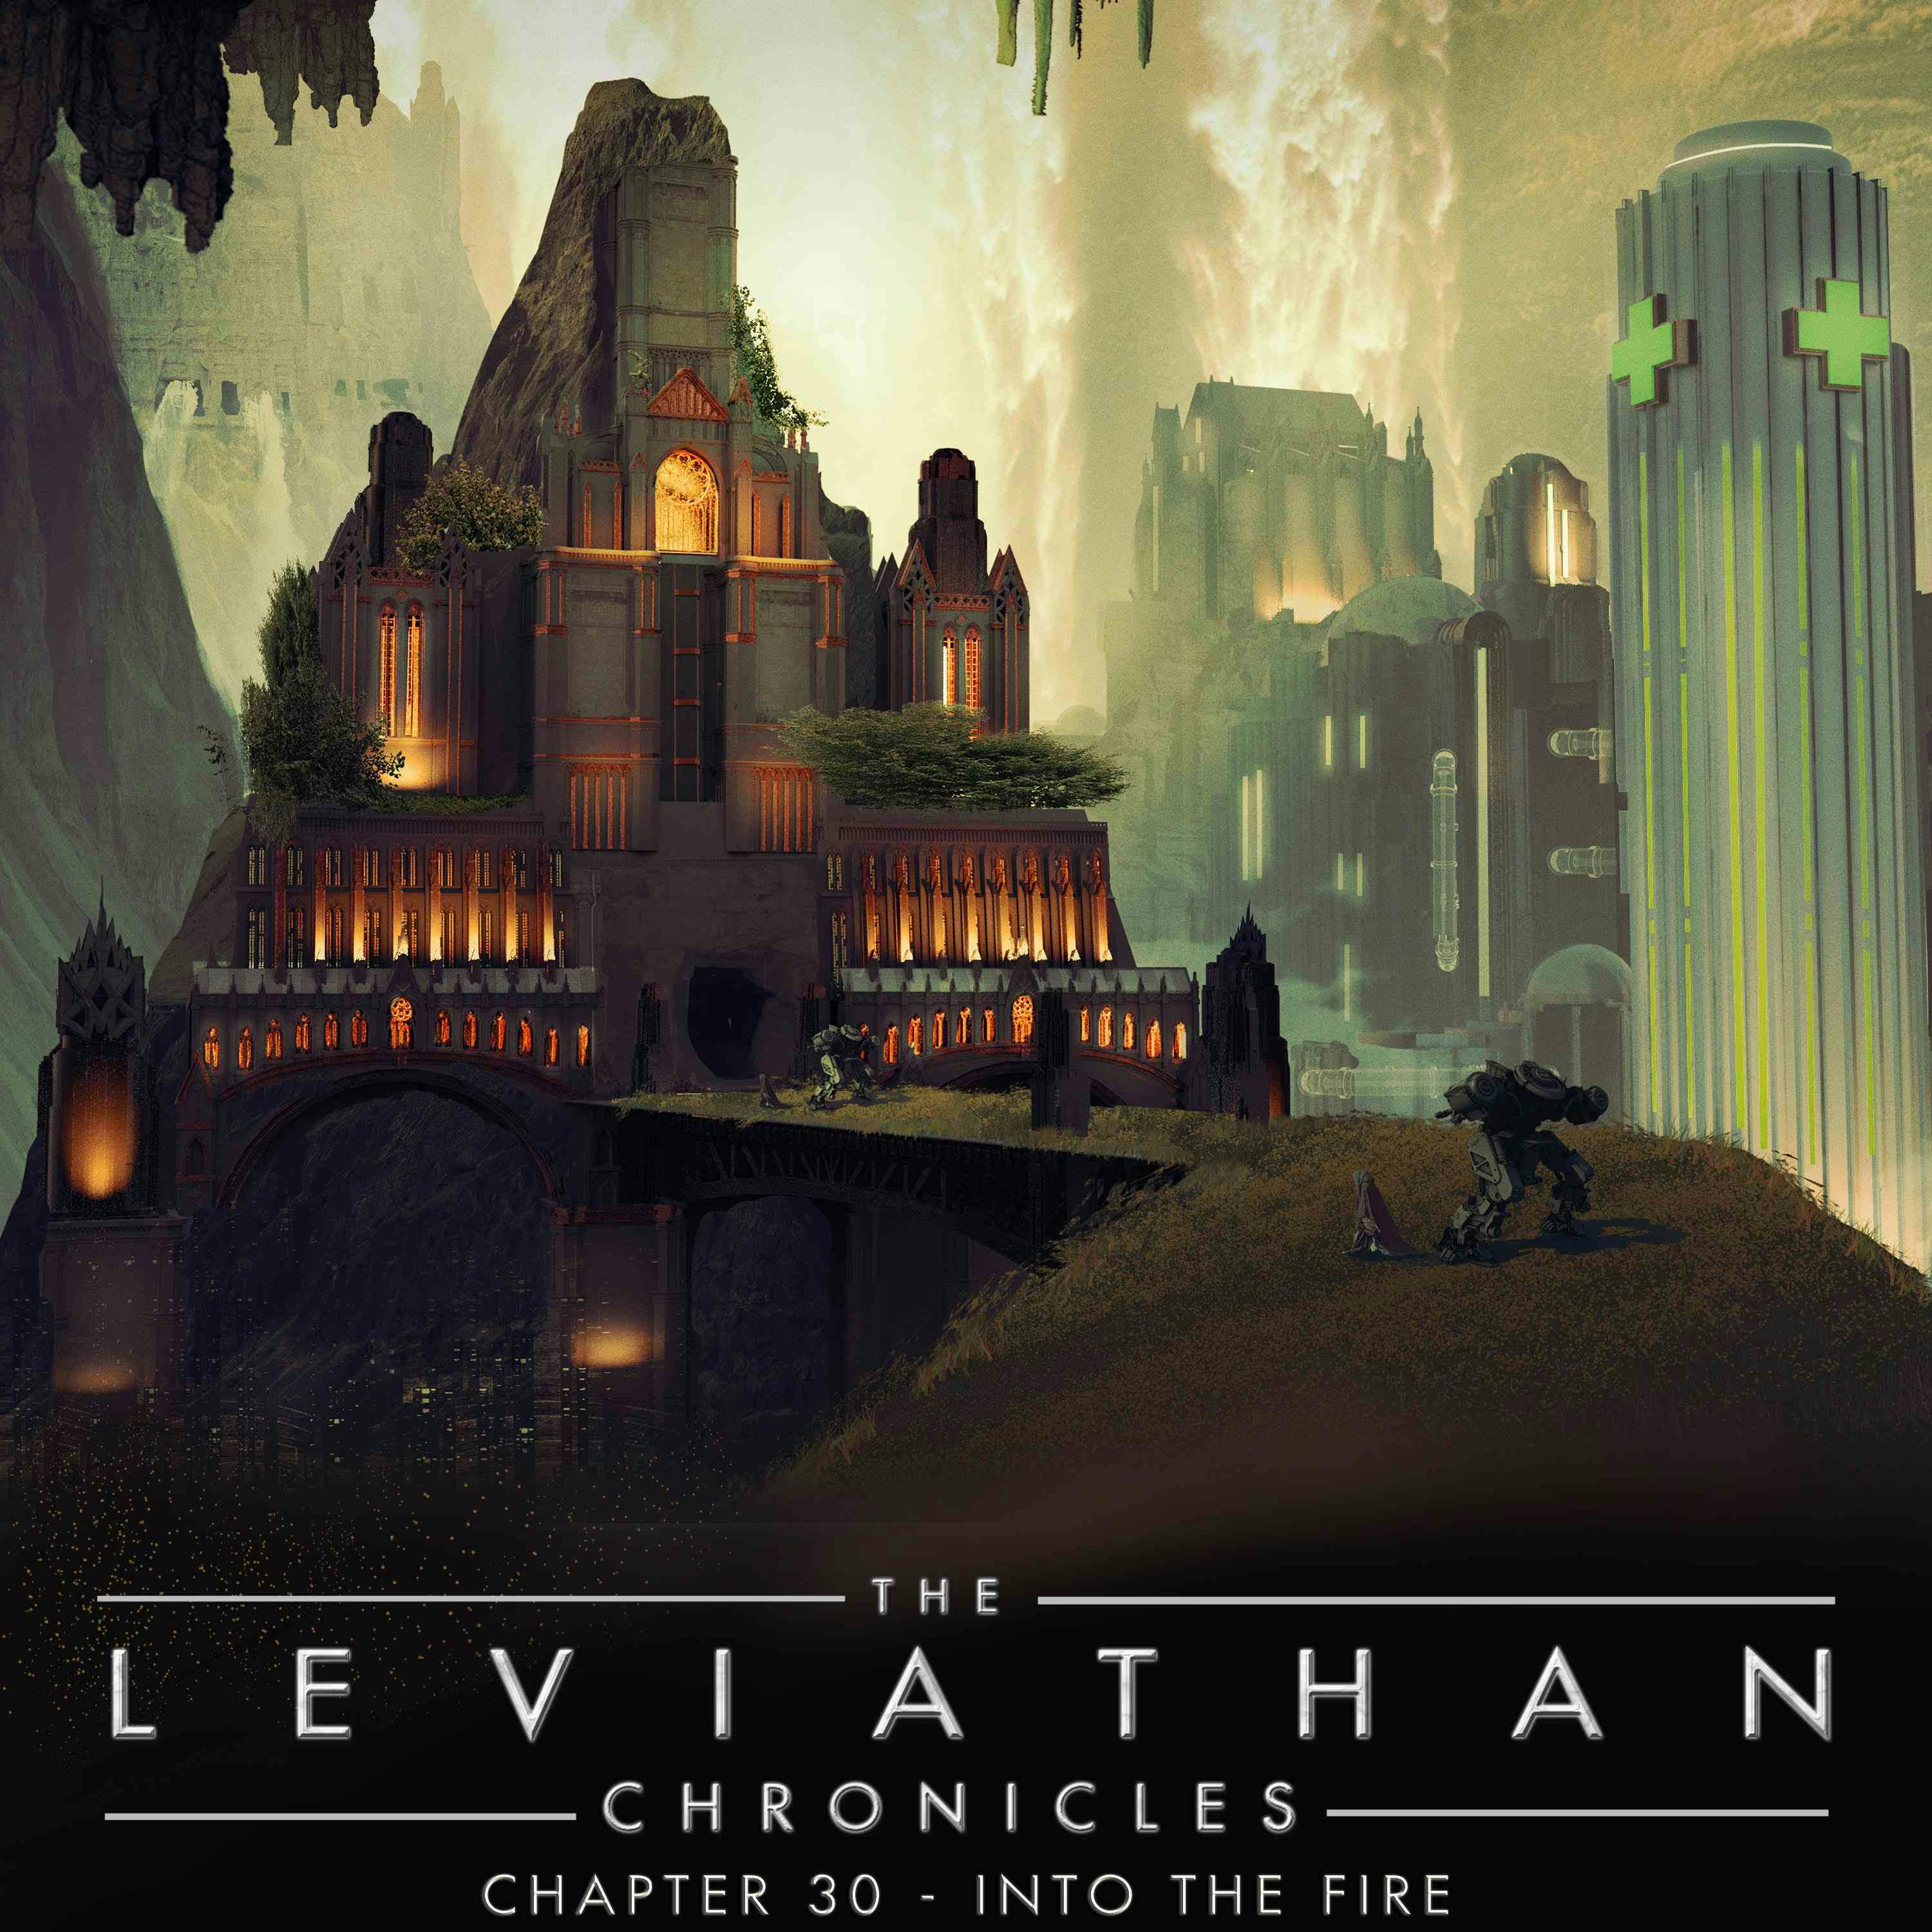 The Leviathan Chronicles | Chapter 30 - Into the Fire